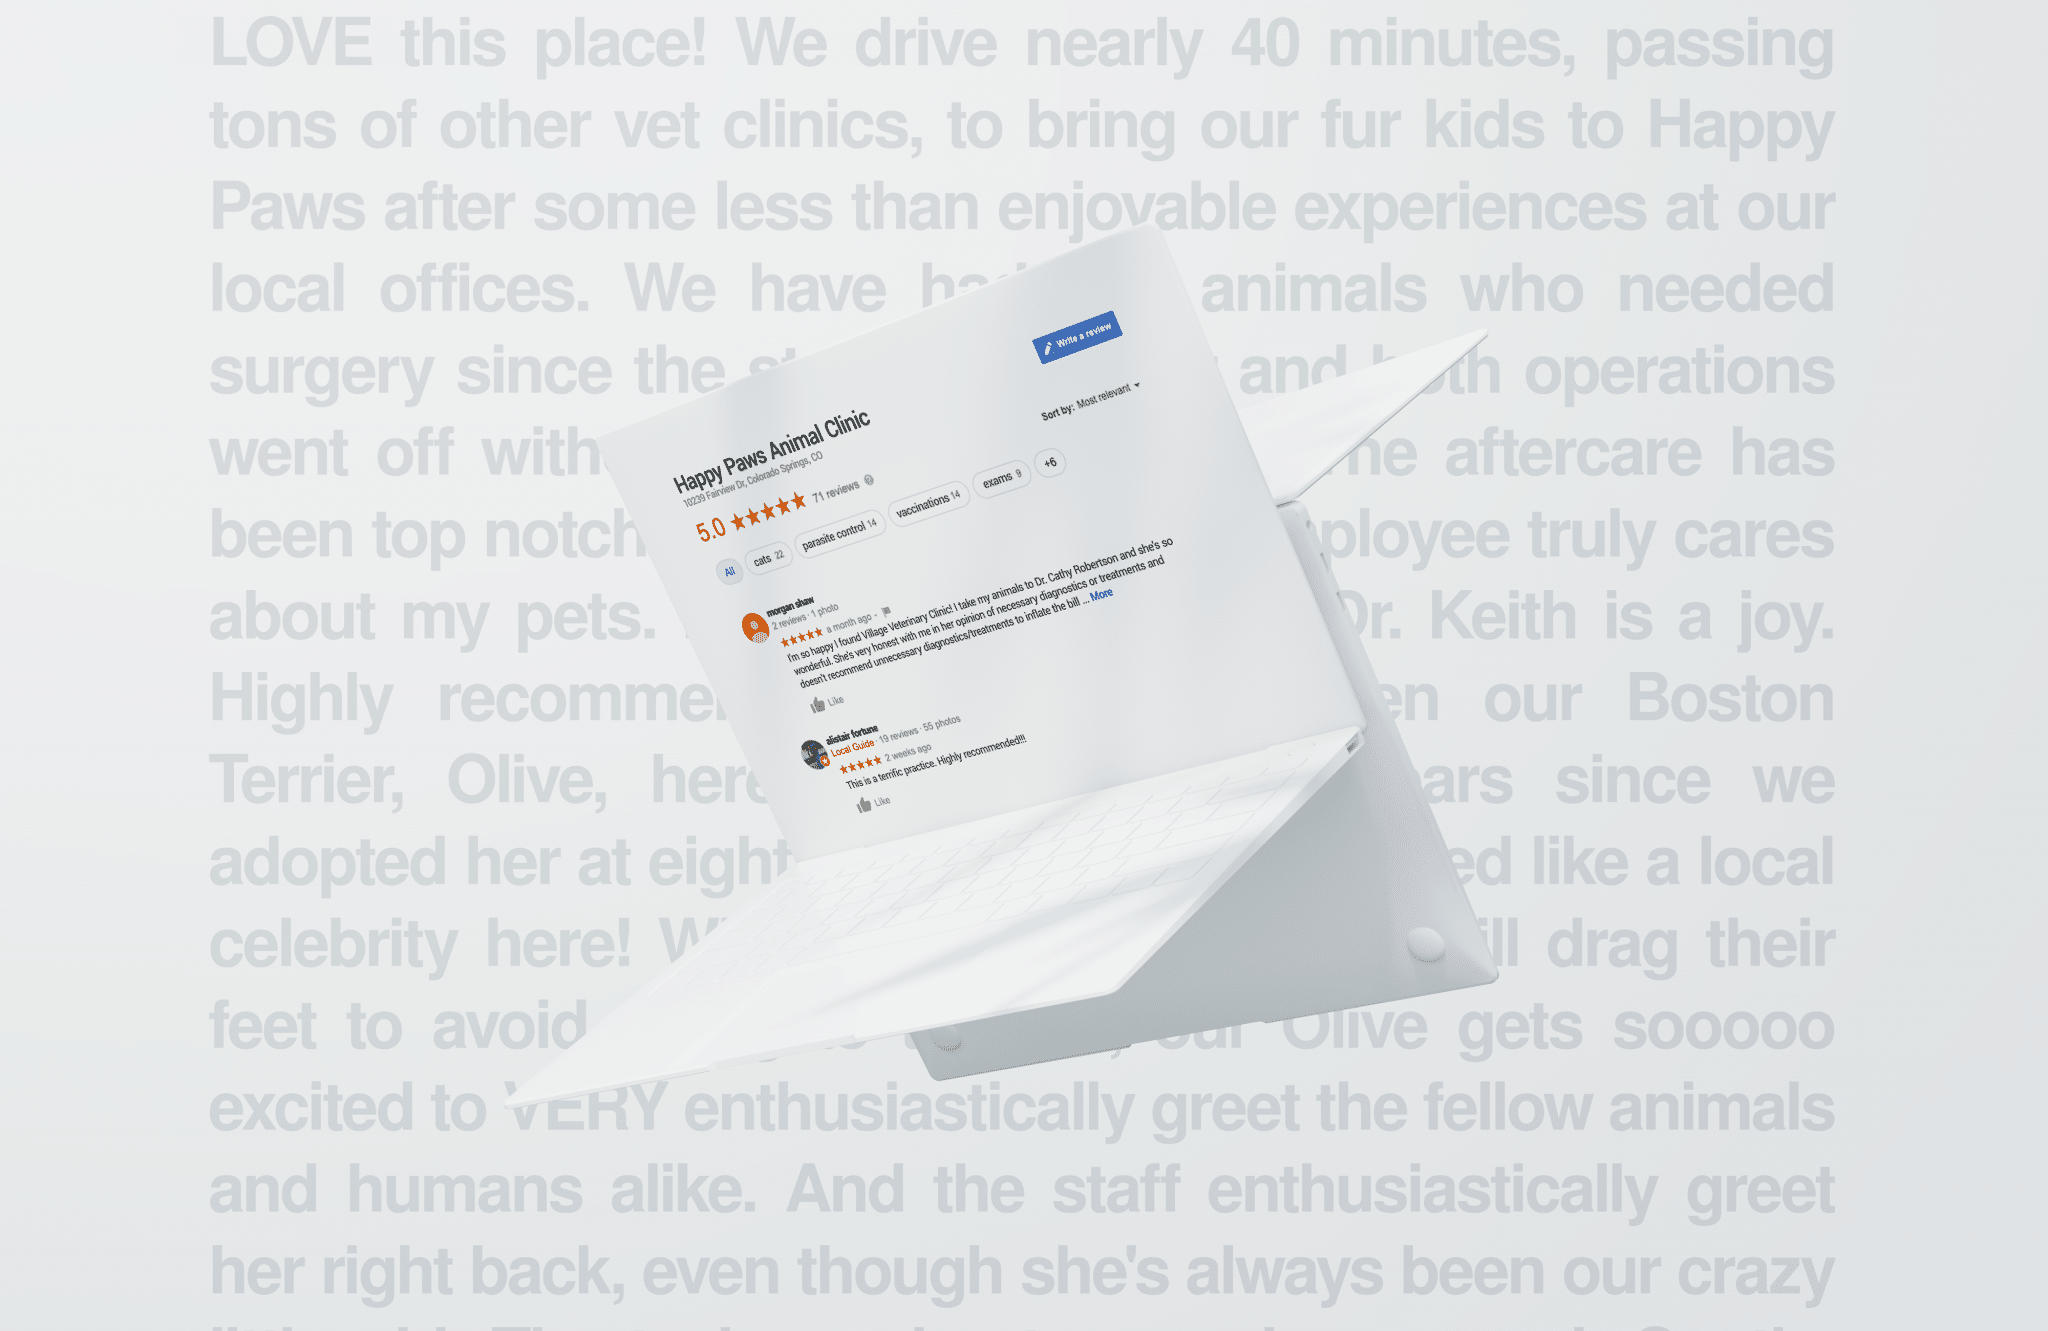 image of 5-star veterinary practice review printed out on paper